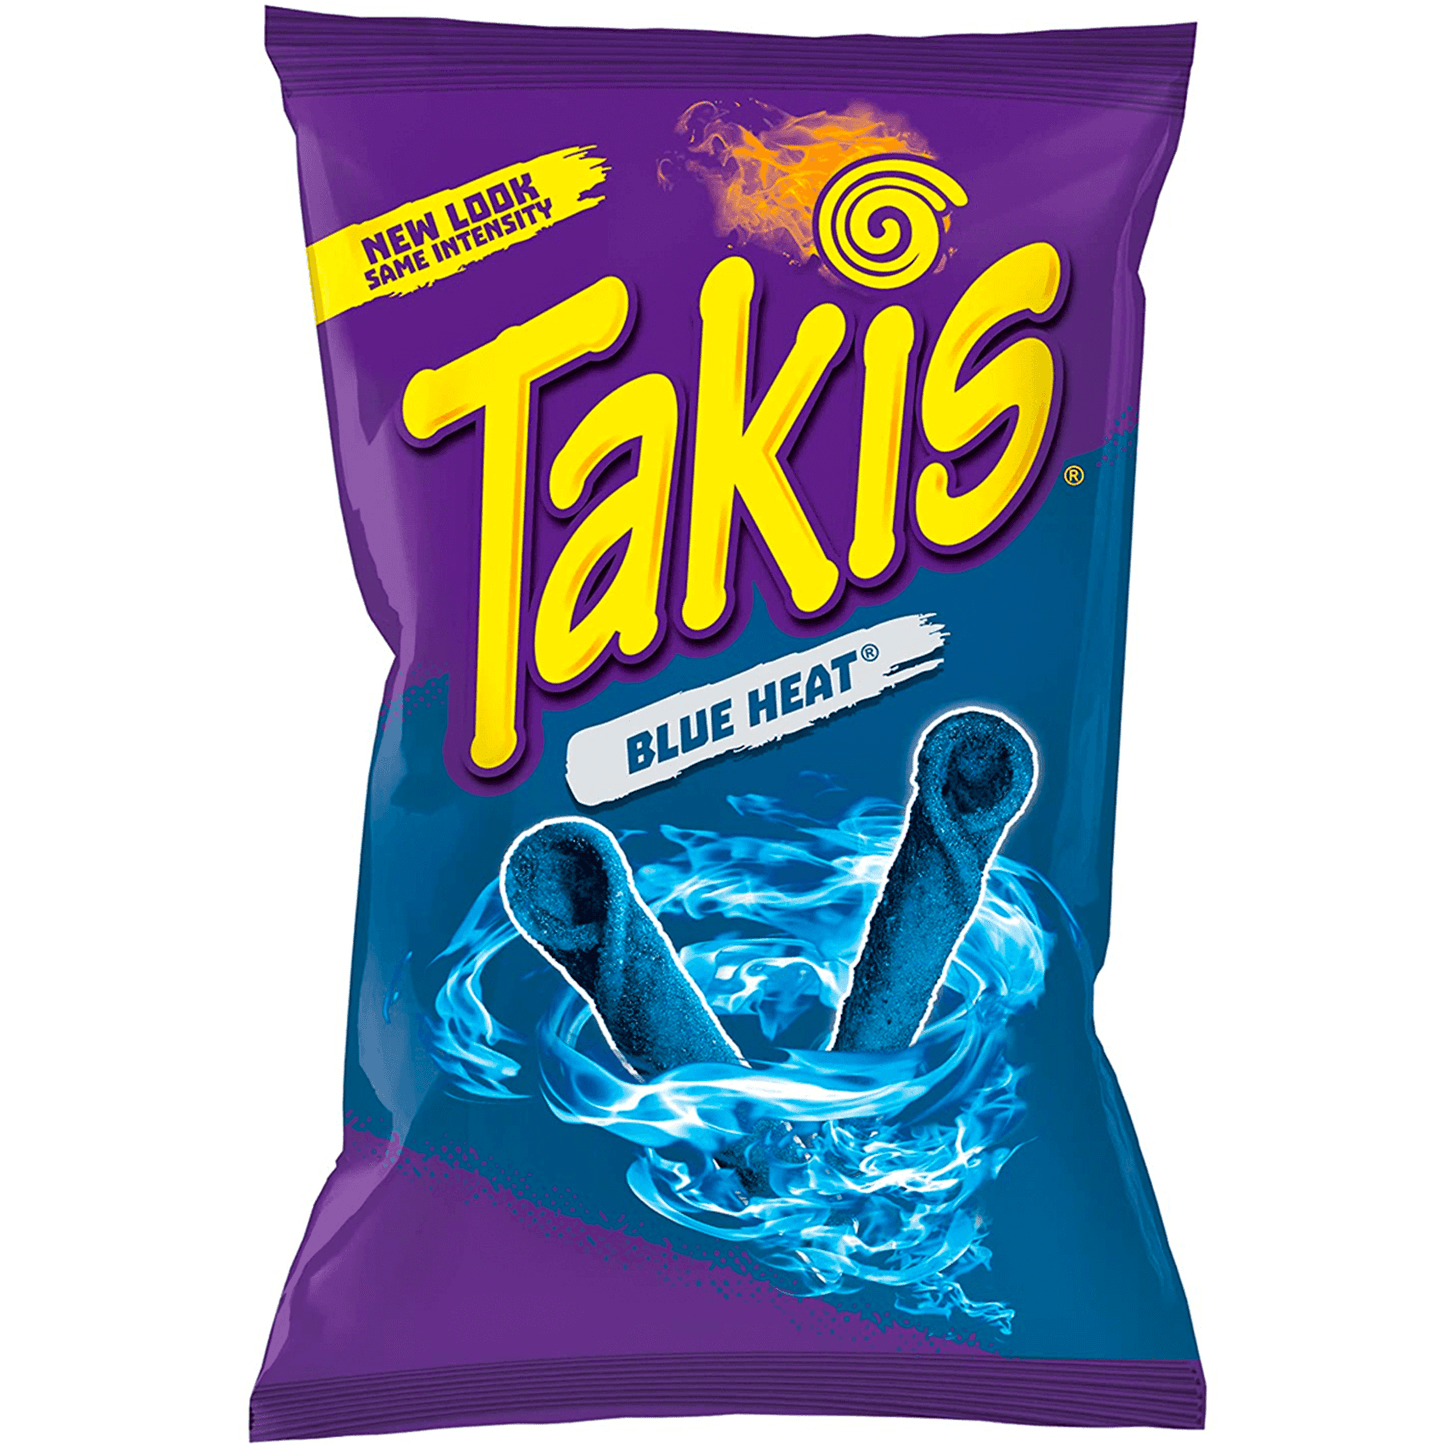 Takis Chips - Many Flavours